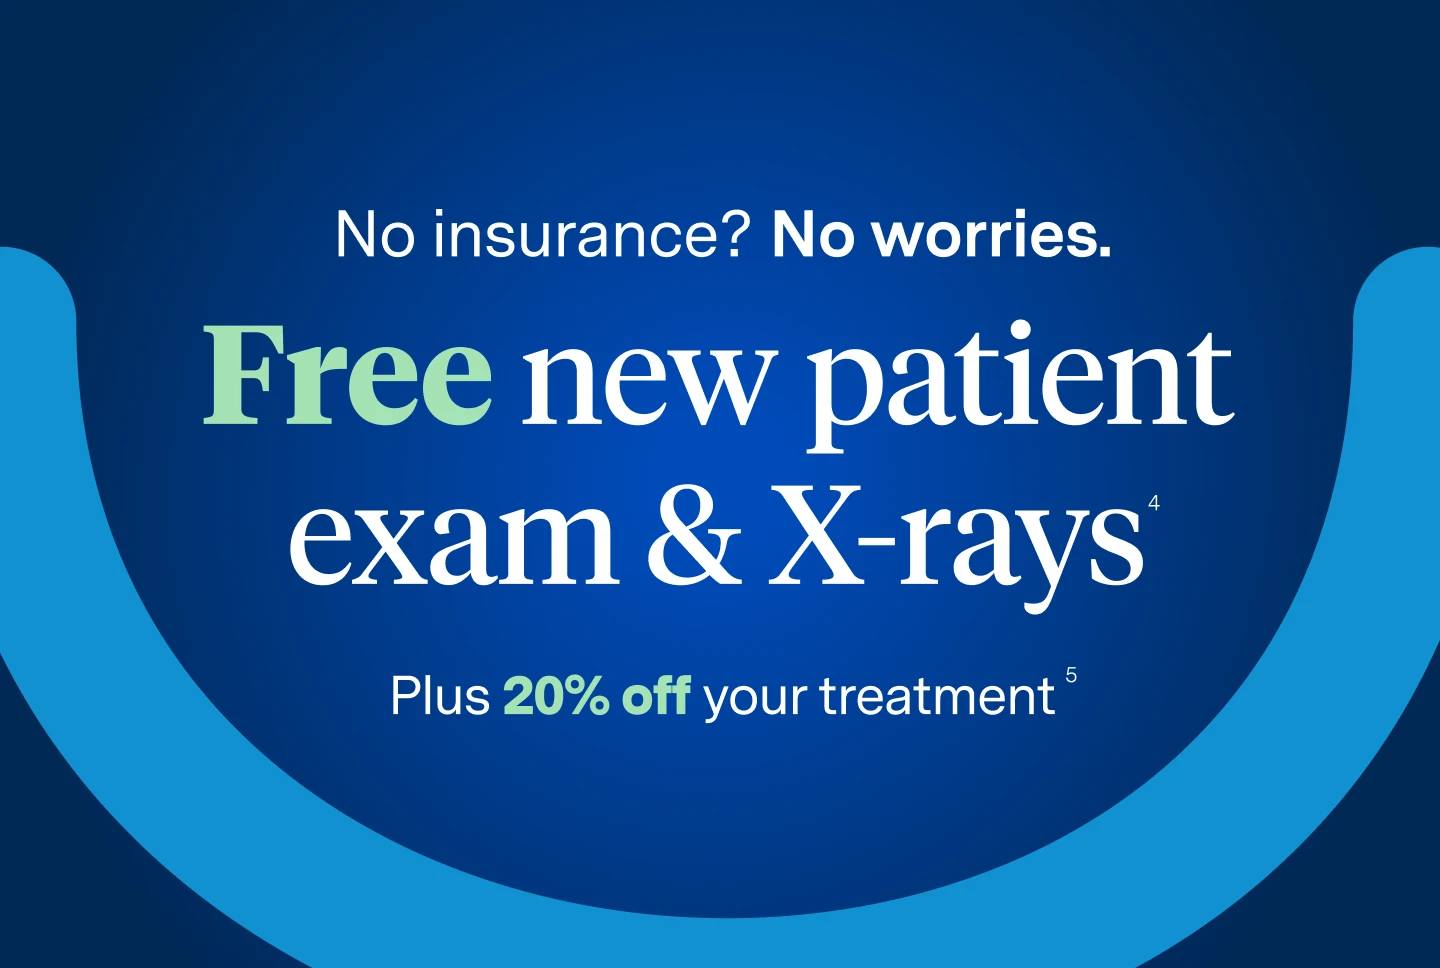 No insurance? No worries. Free new patient exam and X-rays. Plus 20% off your treatment. For new patients who do not have dental insurance. 